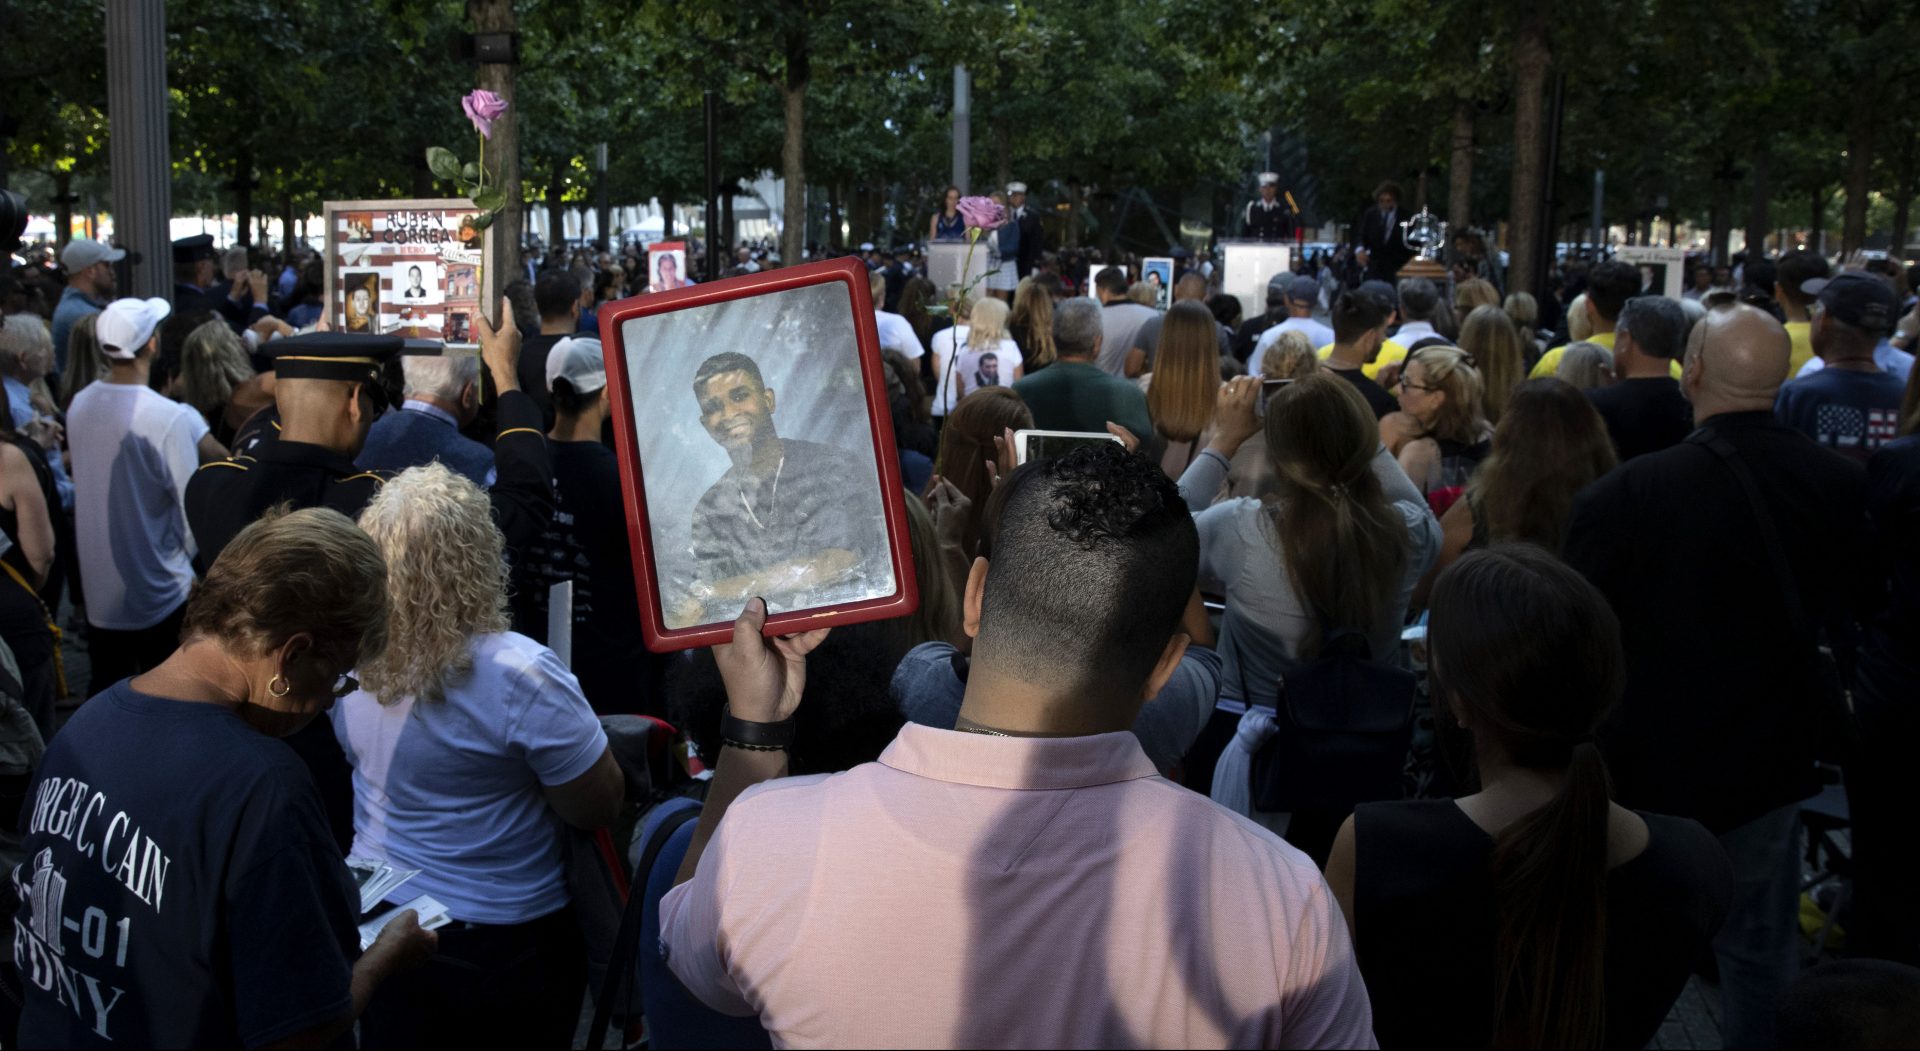 A man holds a photo of a victim during a ceremony marking the 18th anniversary of the attacks of Sept. 11, 2001, at the National September 11 Memorial, Wednesday, Sept. 11, 2019, in New York.